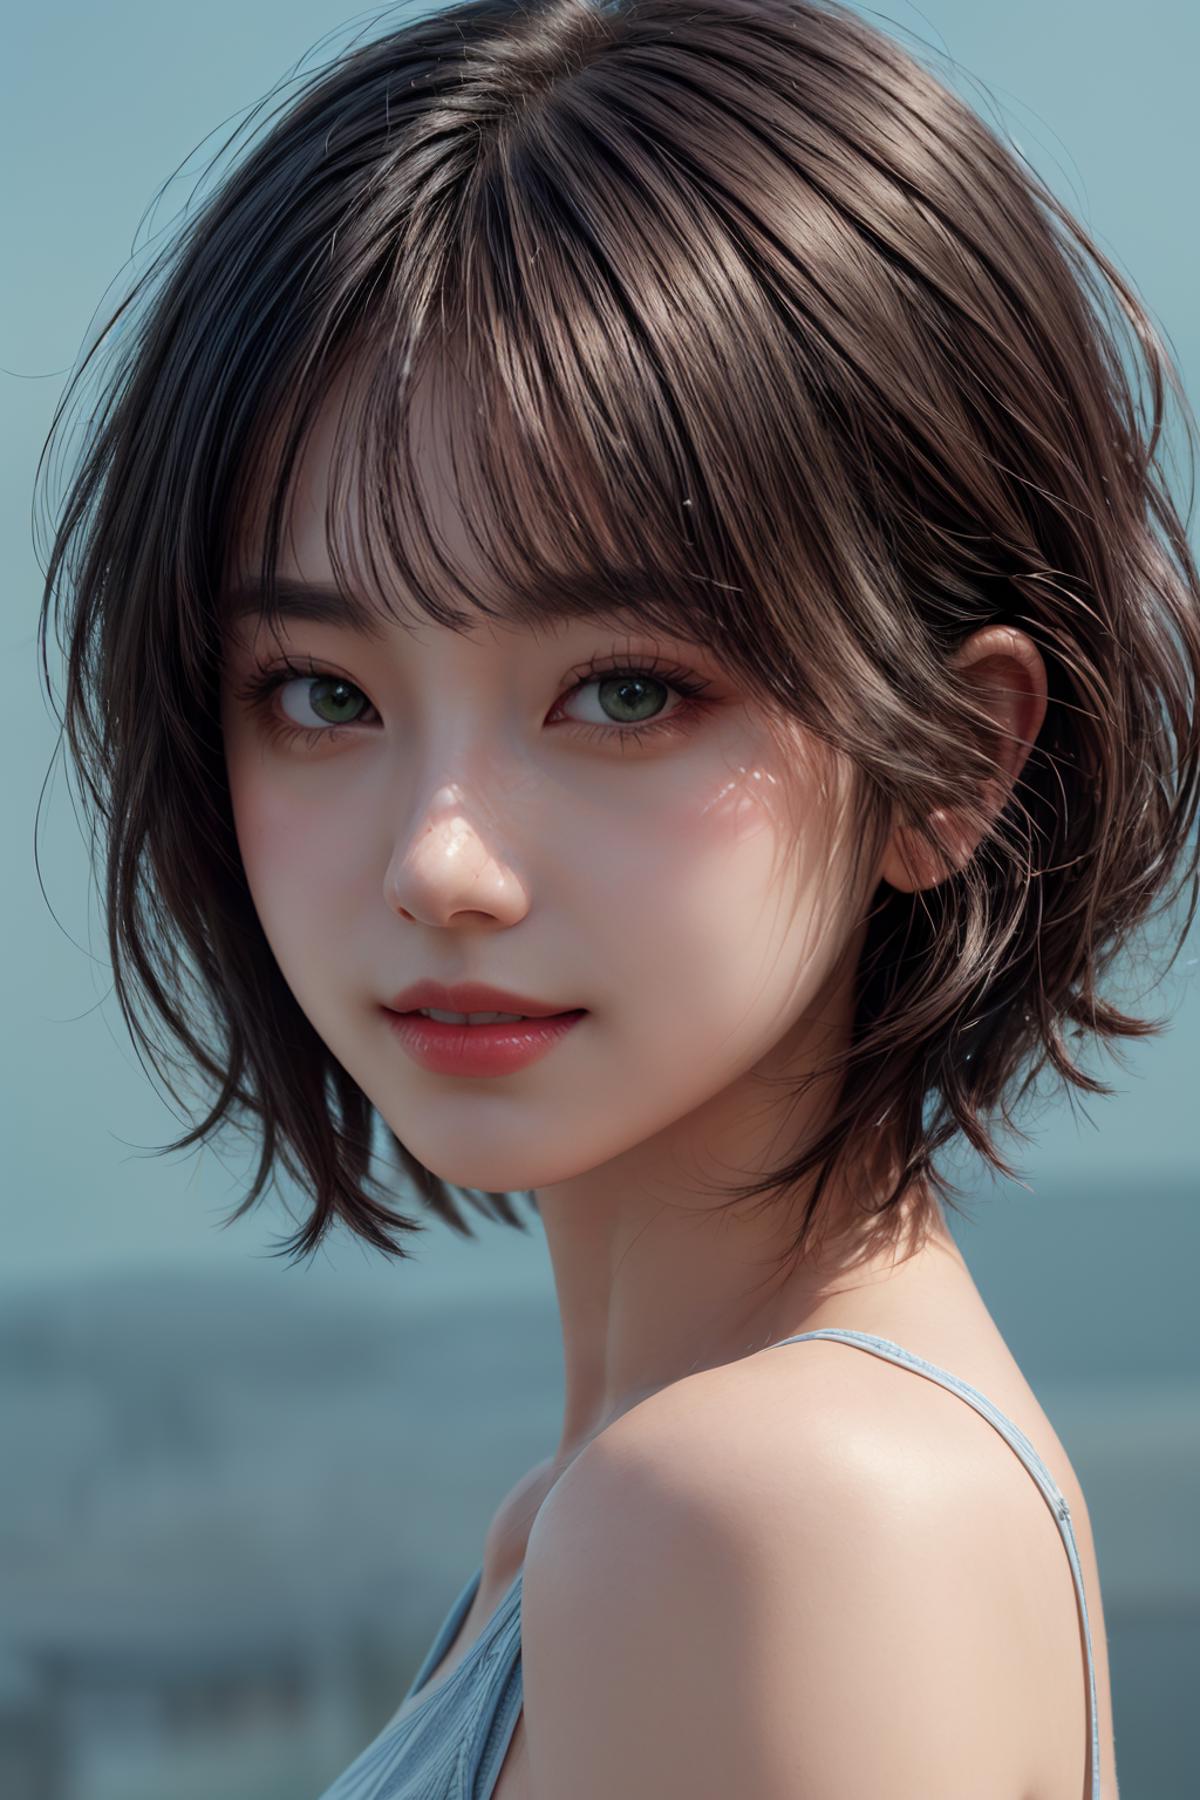 AI model image by supershy2001